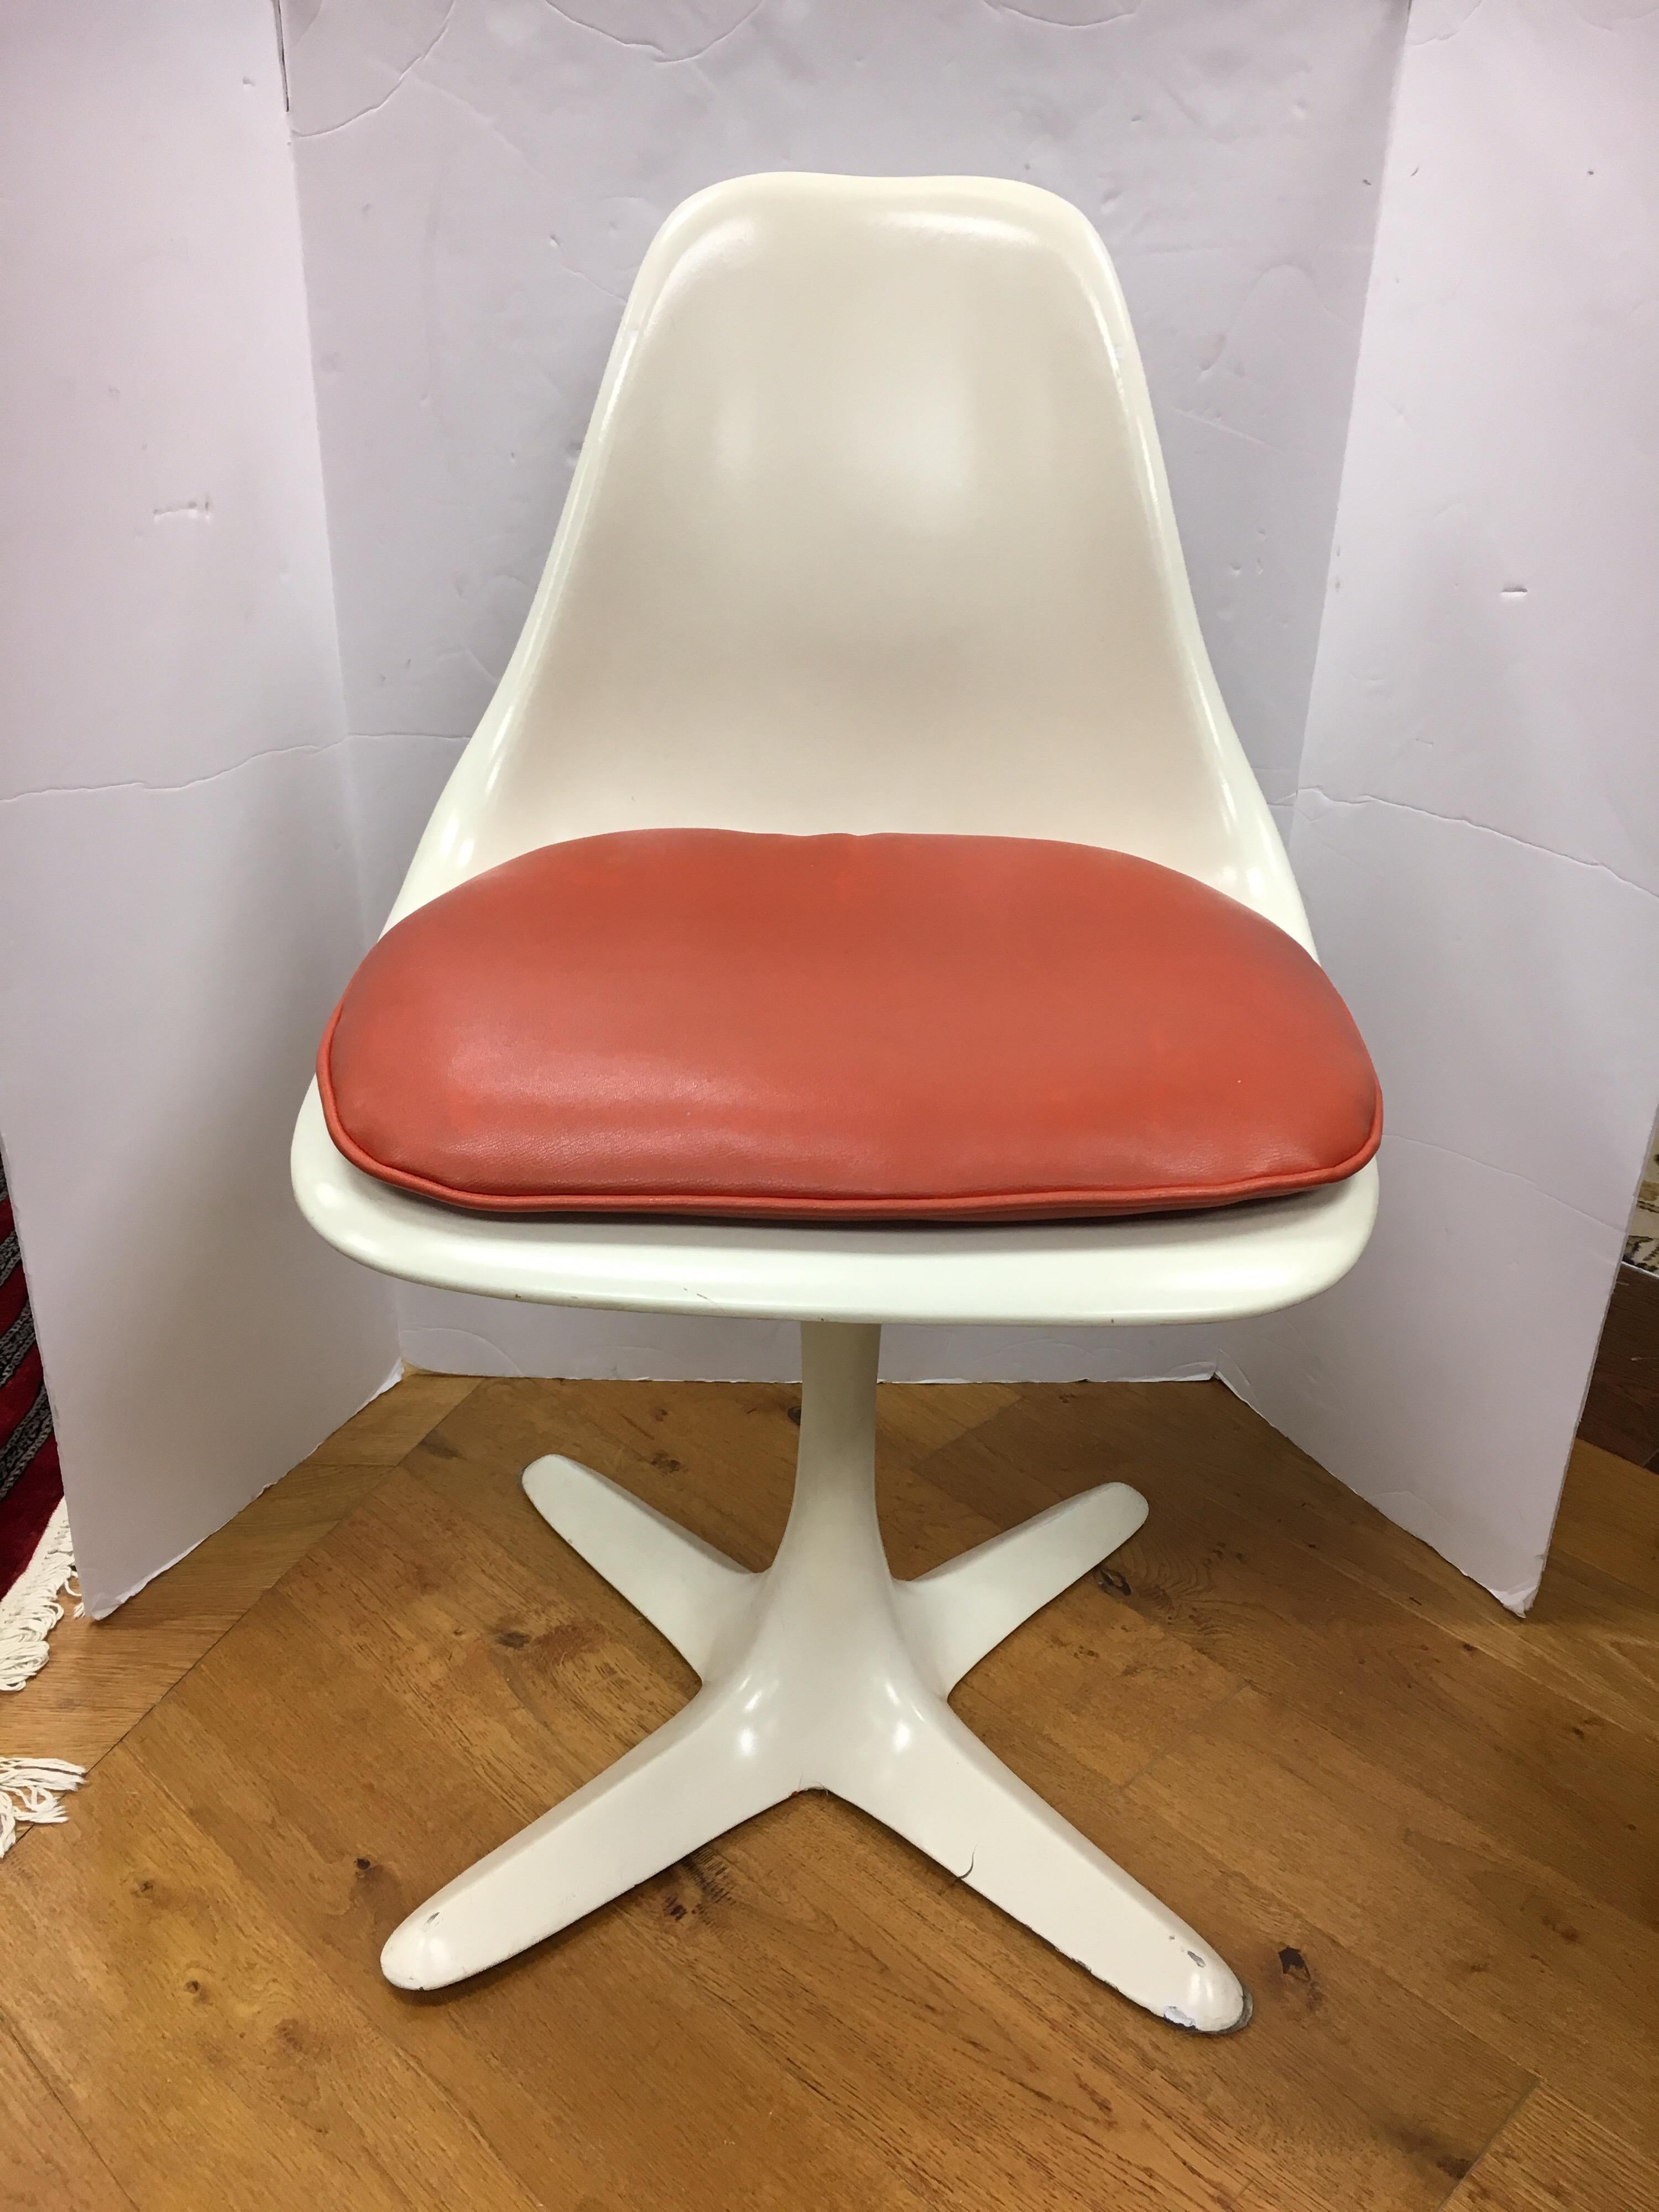 True period Saarinen style set of four white tulip chairs with orange/red removable cushion. Manufactured by Burke, USA in the 1970s. Made of resin, metal and seat fabric which is vinyl.